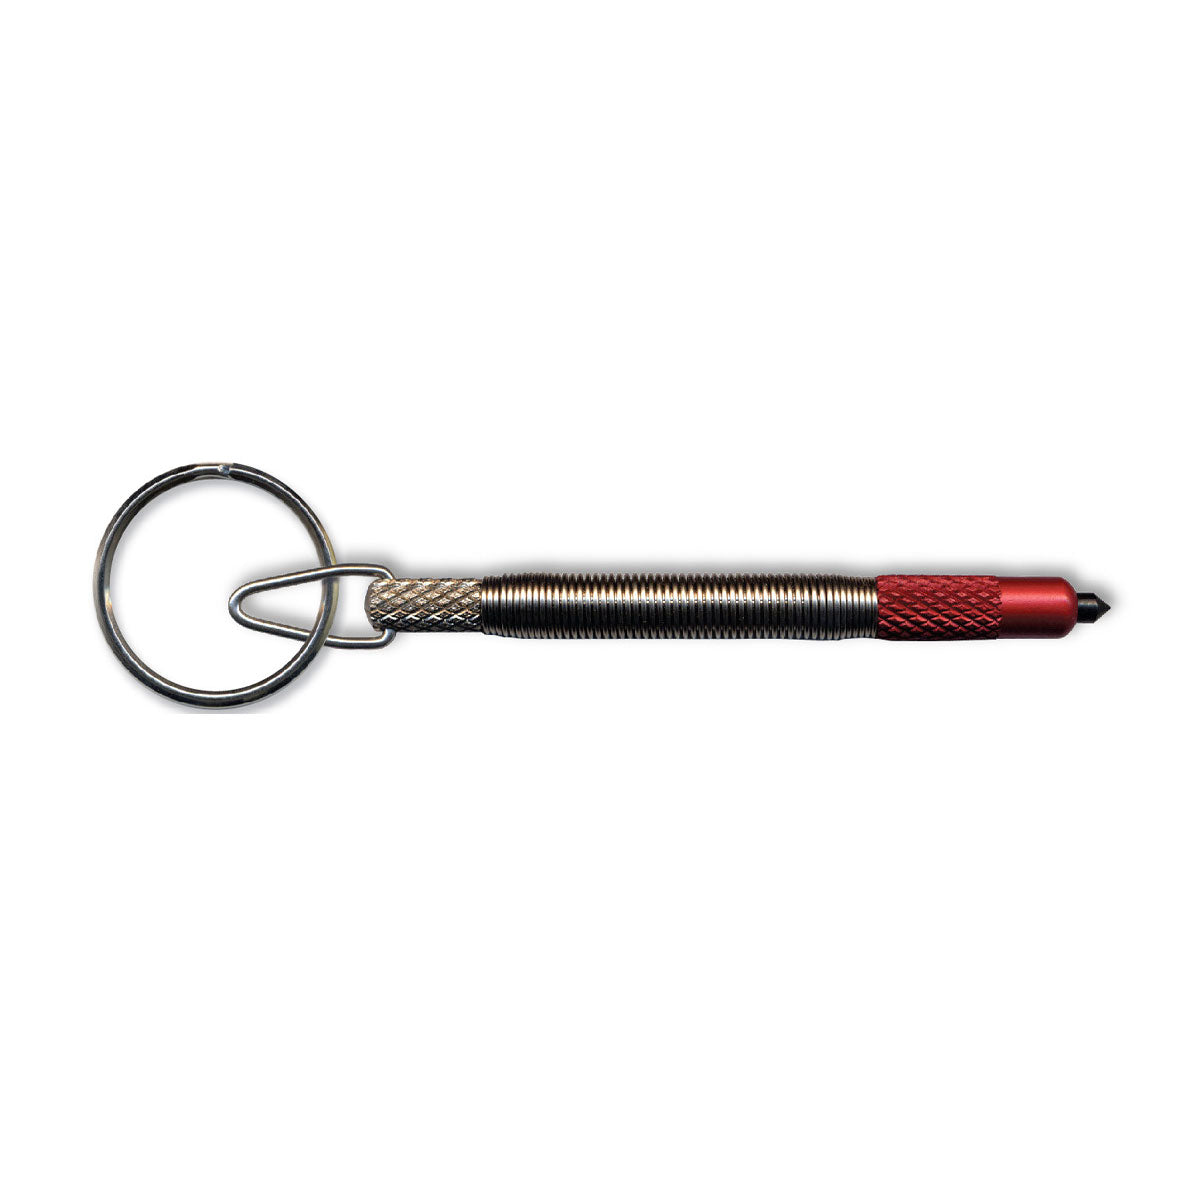 Zak Tool Key Ring Window Punch Nickel/Red Outdoor and Survival Products Zak Tool Tactical Gear Supplier Tactical Distributors Australia